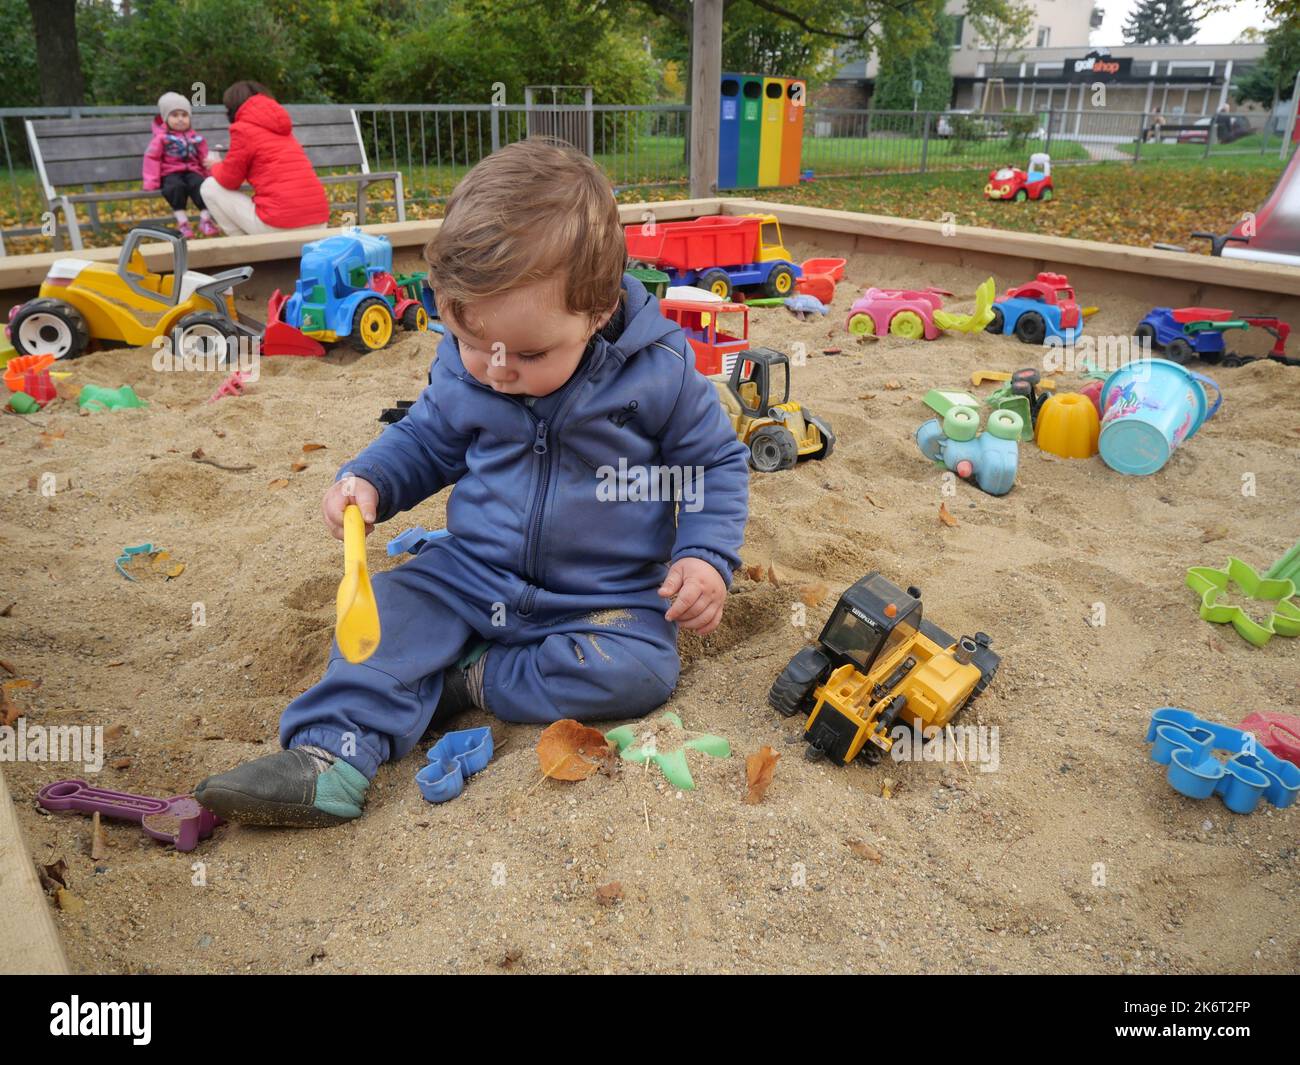 Cute small boy toddler playing in the sand on a playground. Child sitting in a sandpit holding a plastic toy, with other toys in the background. Stock Photo